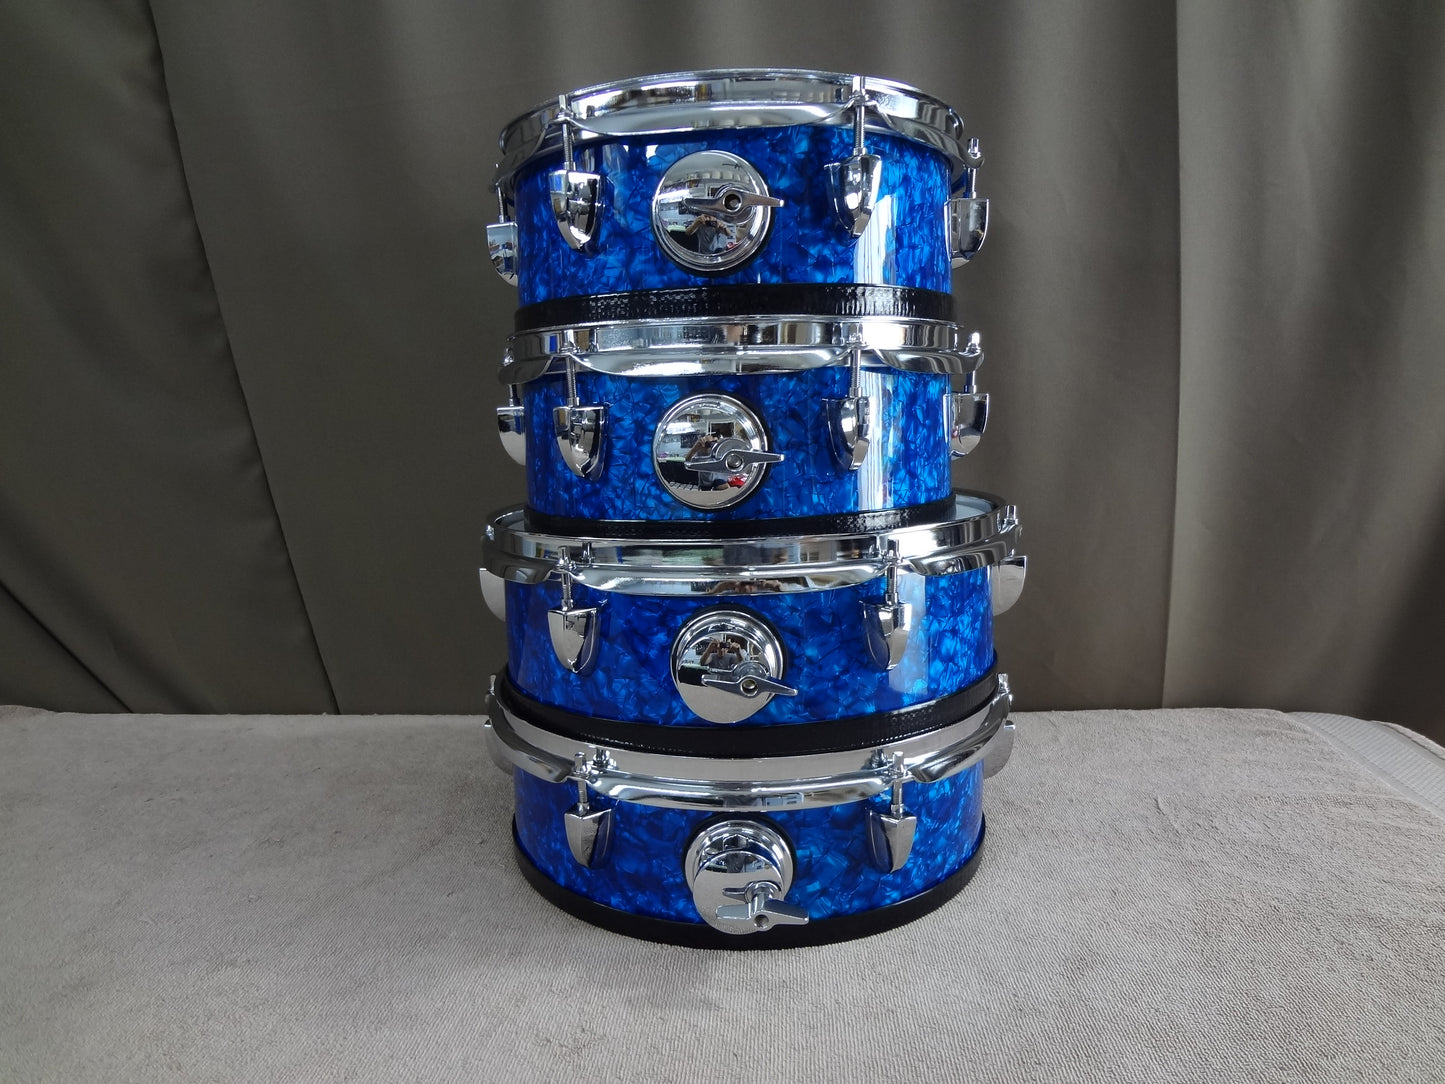 NEW 4 PIECE CUSTOM ELECTRONIC DRUM SHELL PACK - BLUE PEARL